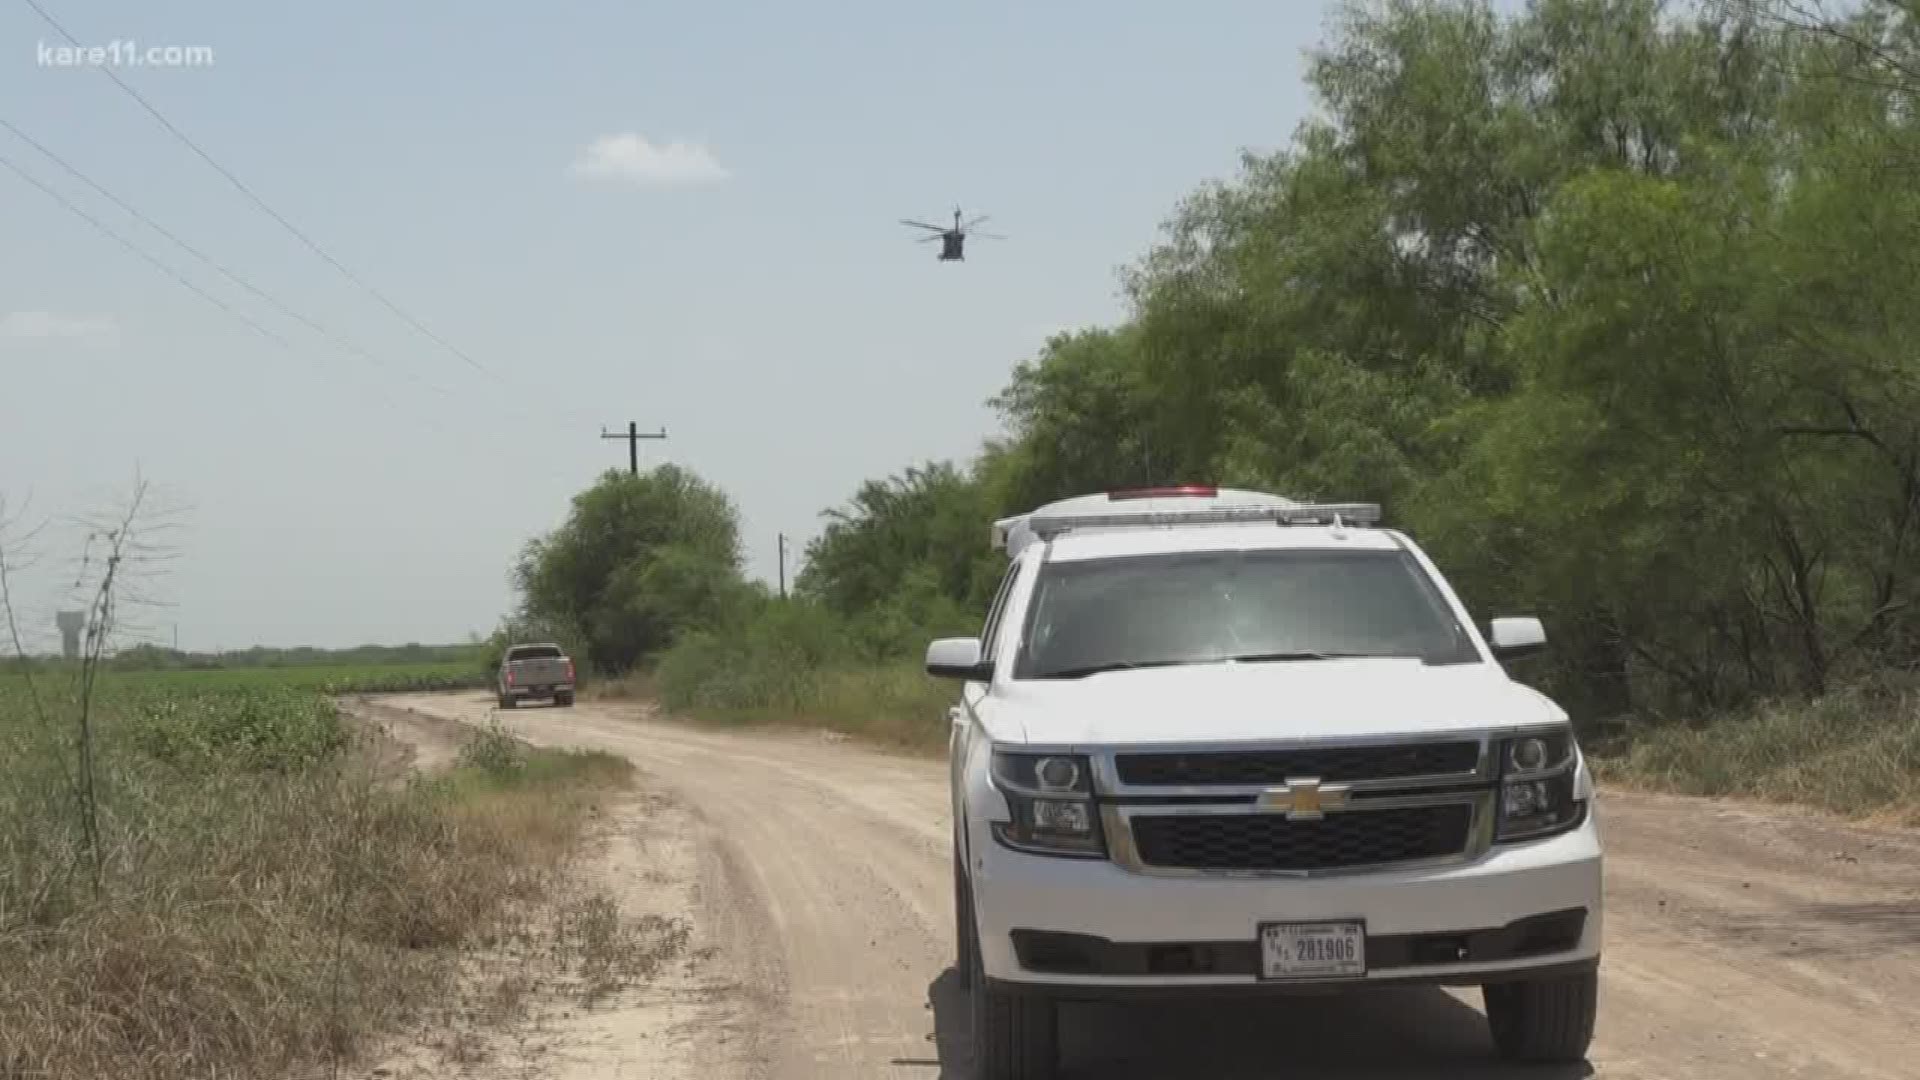 KARE 11’s Karla Hult traveled to the southern border to hear from those on the front line about how the immigration issue is playing out for them: from those patrolling the border, to those trying to cross, to those trying to help in what both sides agree is a humanitarian crisis.